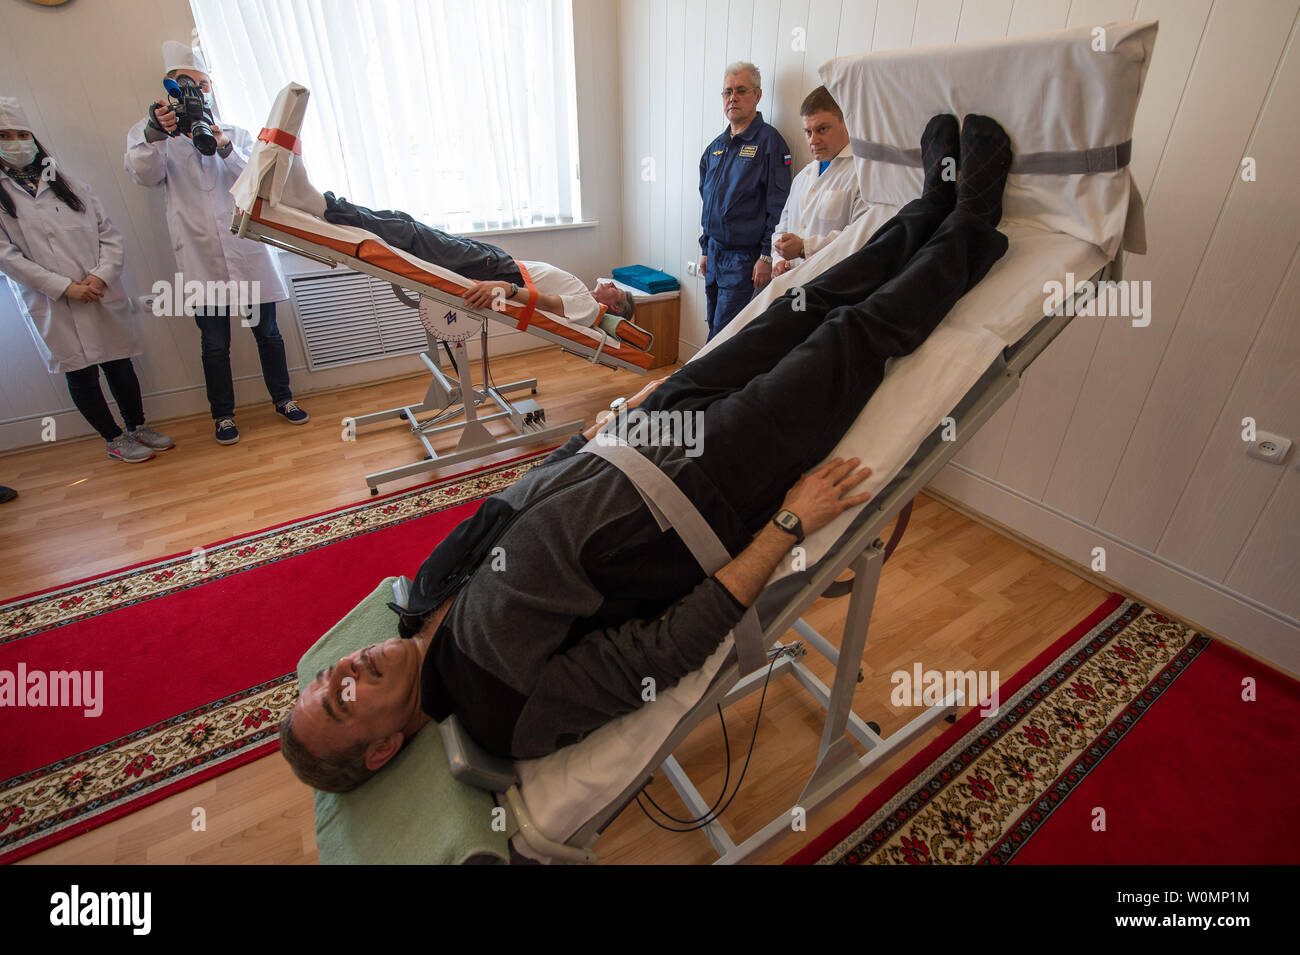 Expedition 43 crew members Gennady Padalka, background, and Mikhail Kornienko of the Russian Federal Space Agency (Roscosmos) take part the tilt table training during media day, on March 21, 2015, Baikonur, Kazakhstan. ..Part of NASA's Human Research Program, the One-Year Mission on the International Space Station is a joint effort between the U.S. space agency, the Russian Federal Space Agency (Roscosmos) and their international partners. The mission is part of a scientific research project studying long term spaceflight and the effects it has on the human body...NASA astronaut Scott Kelly an Stock Photo